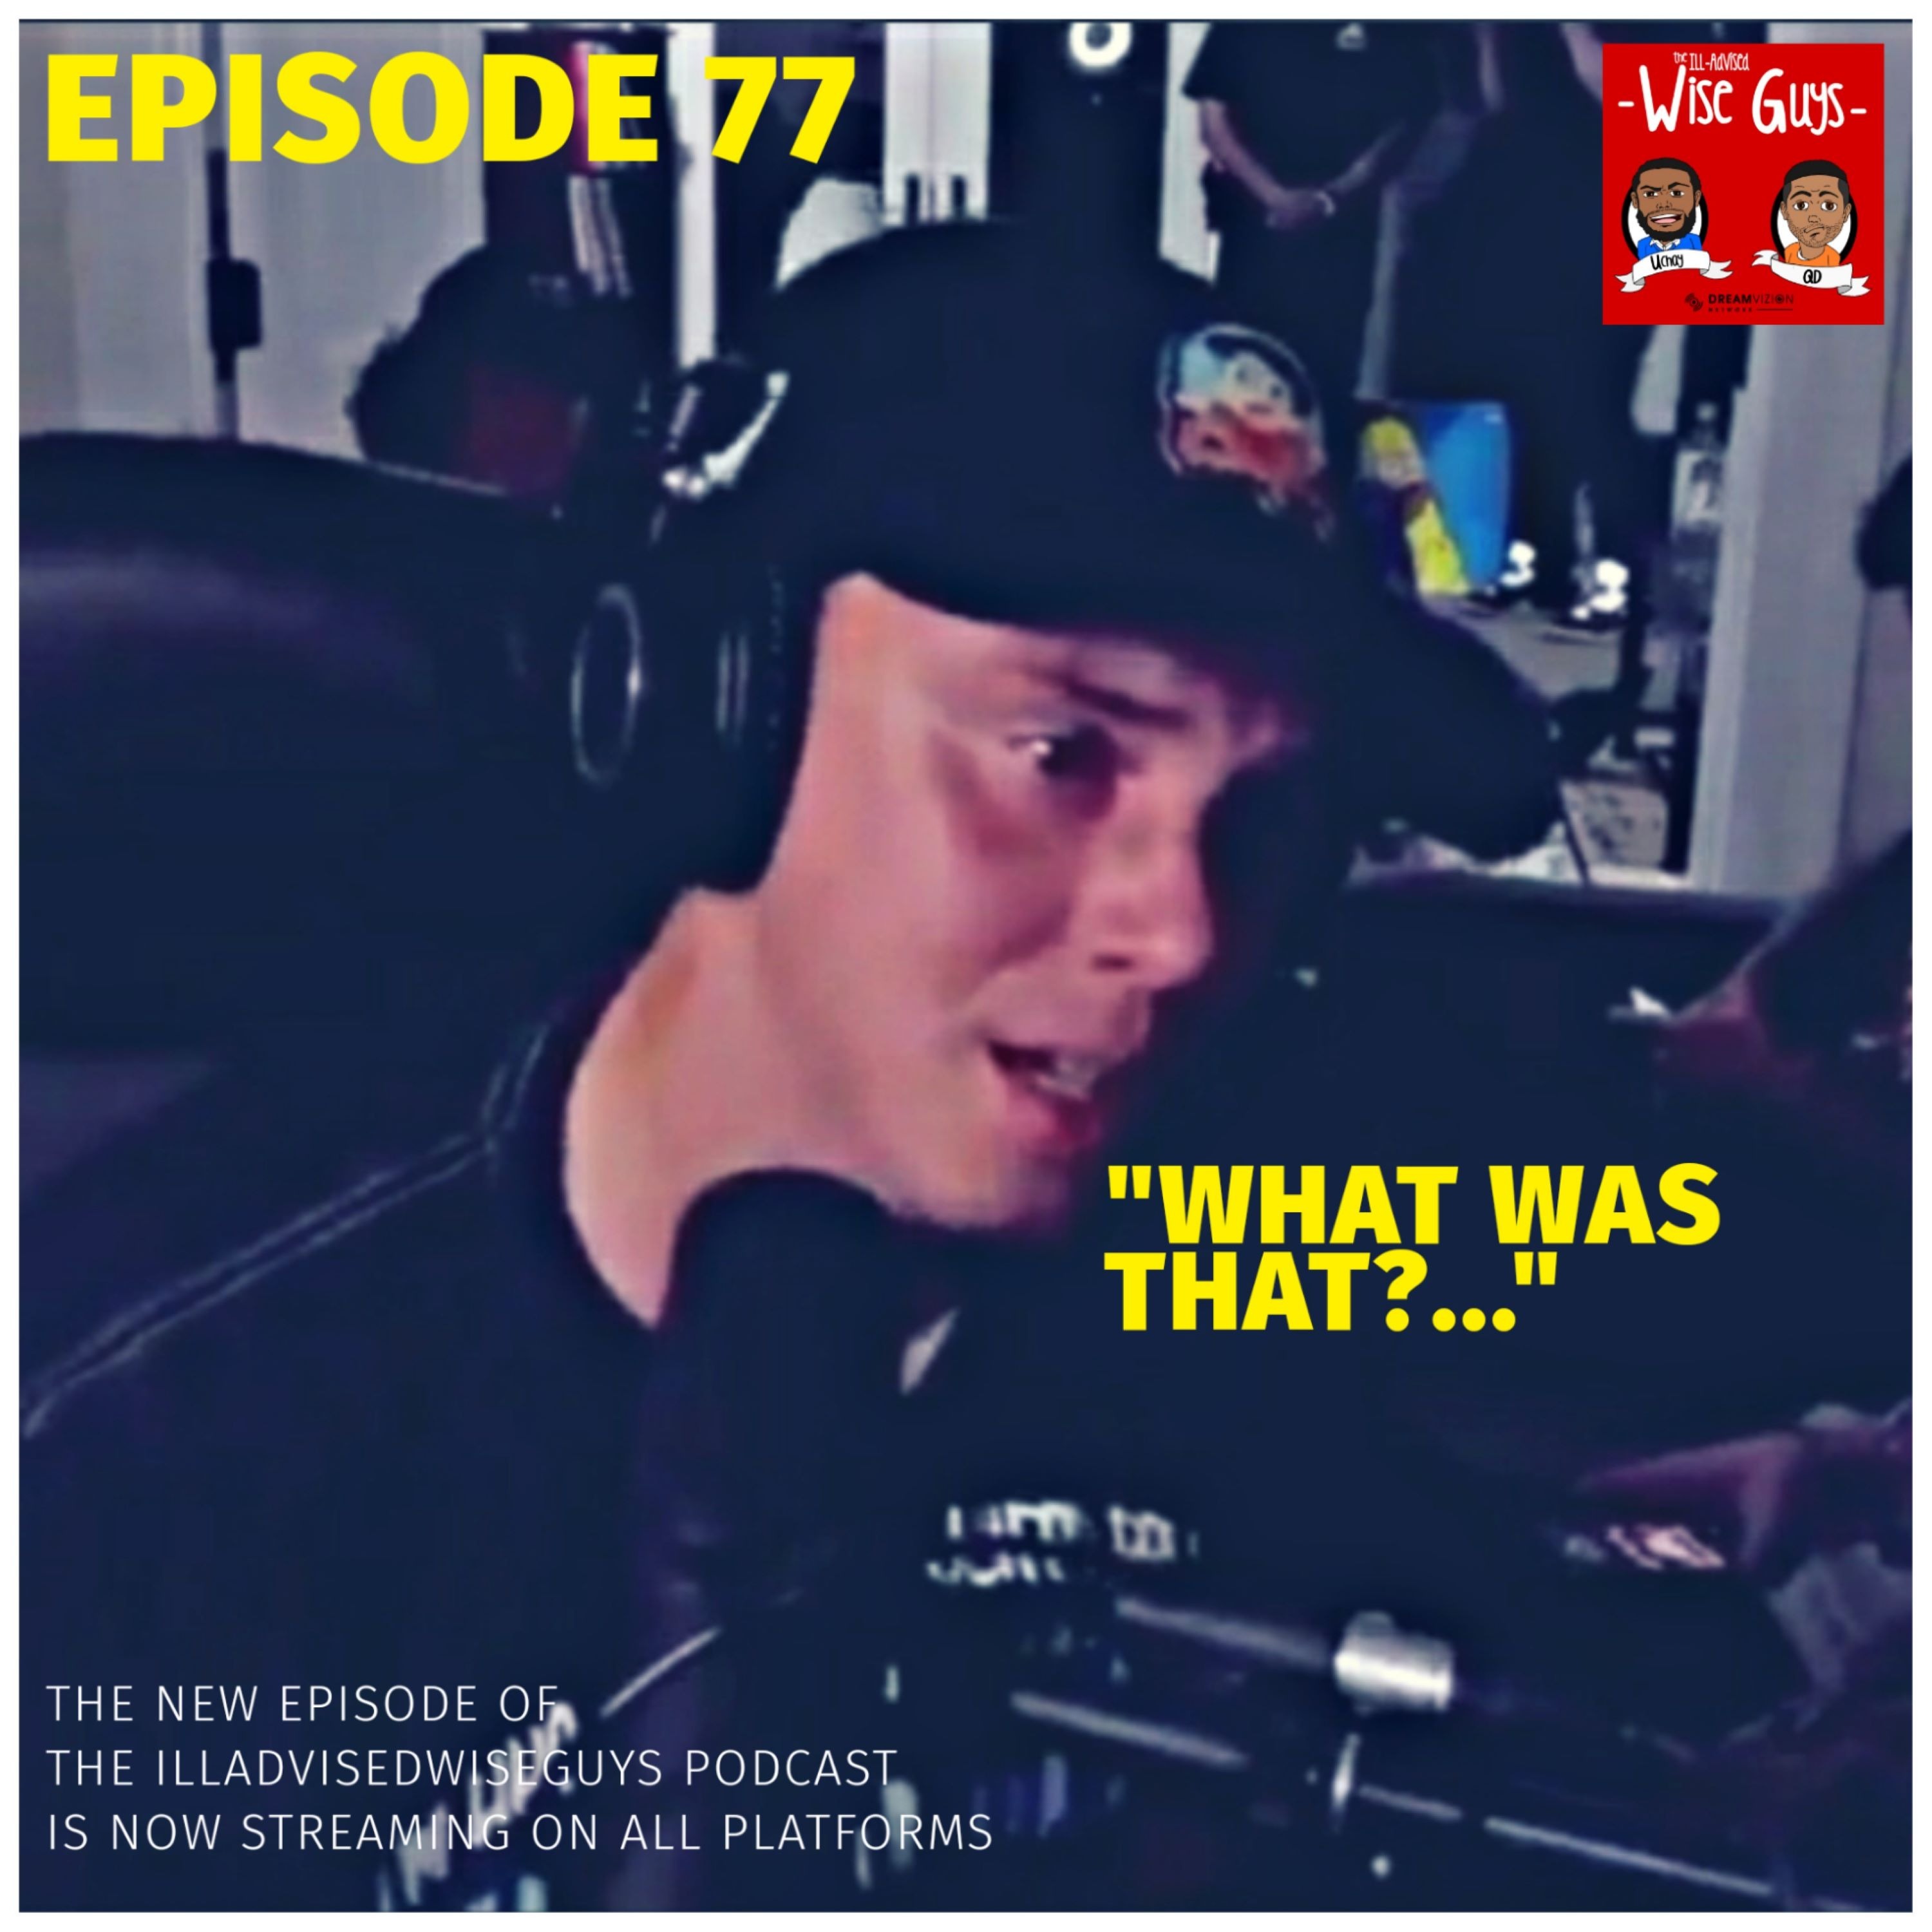 Episode 77 - "What Was That?..." Image